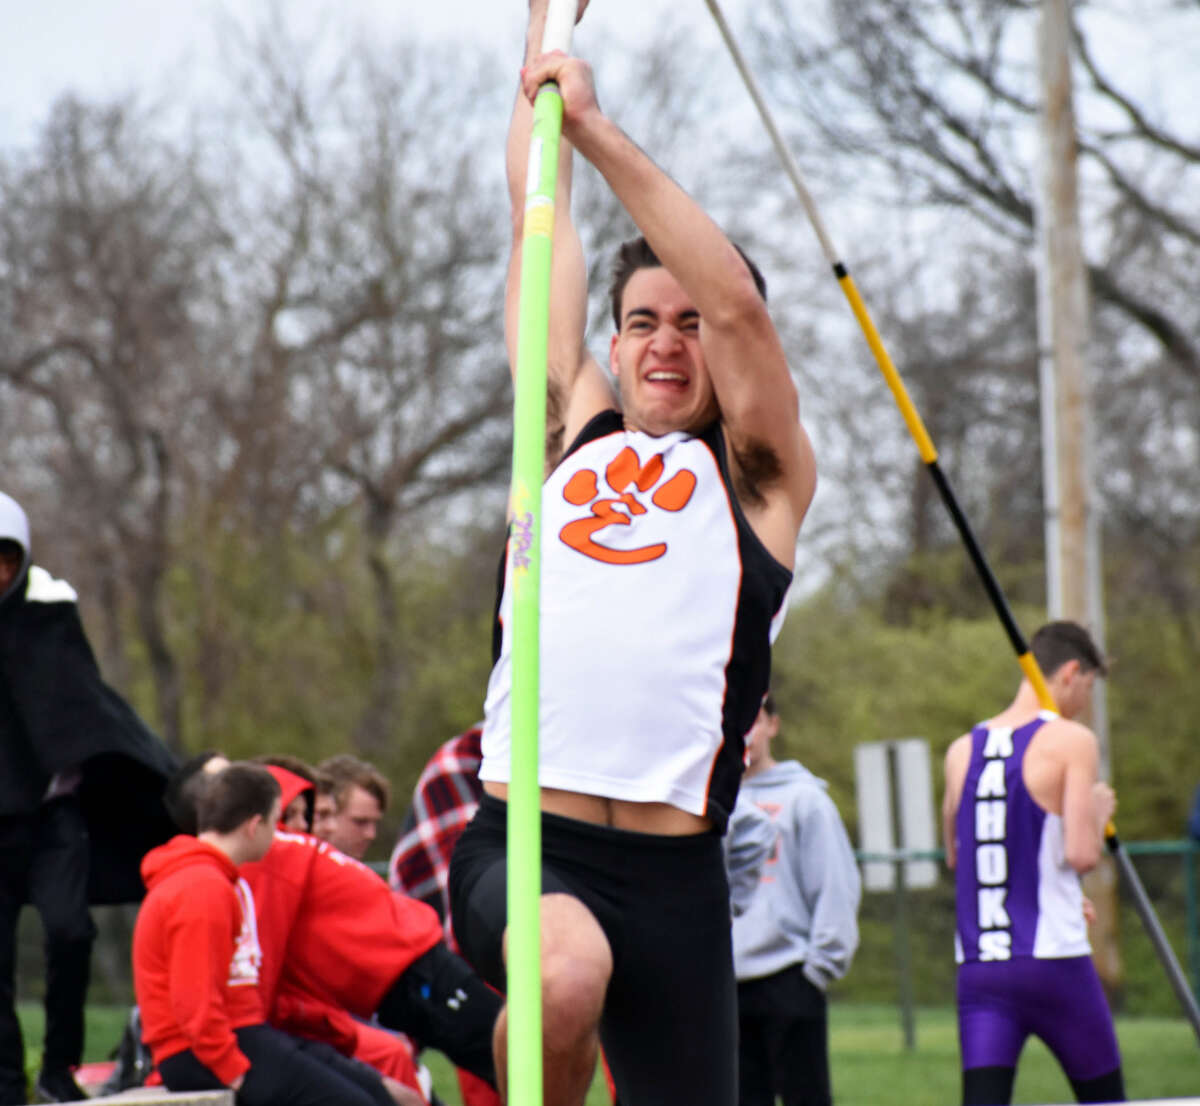 Edwardsville senior Blake Neville competes in the pole vault during the Winston Brown Track and Field Invitational on Saturday at EHS. Neville took second.